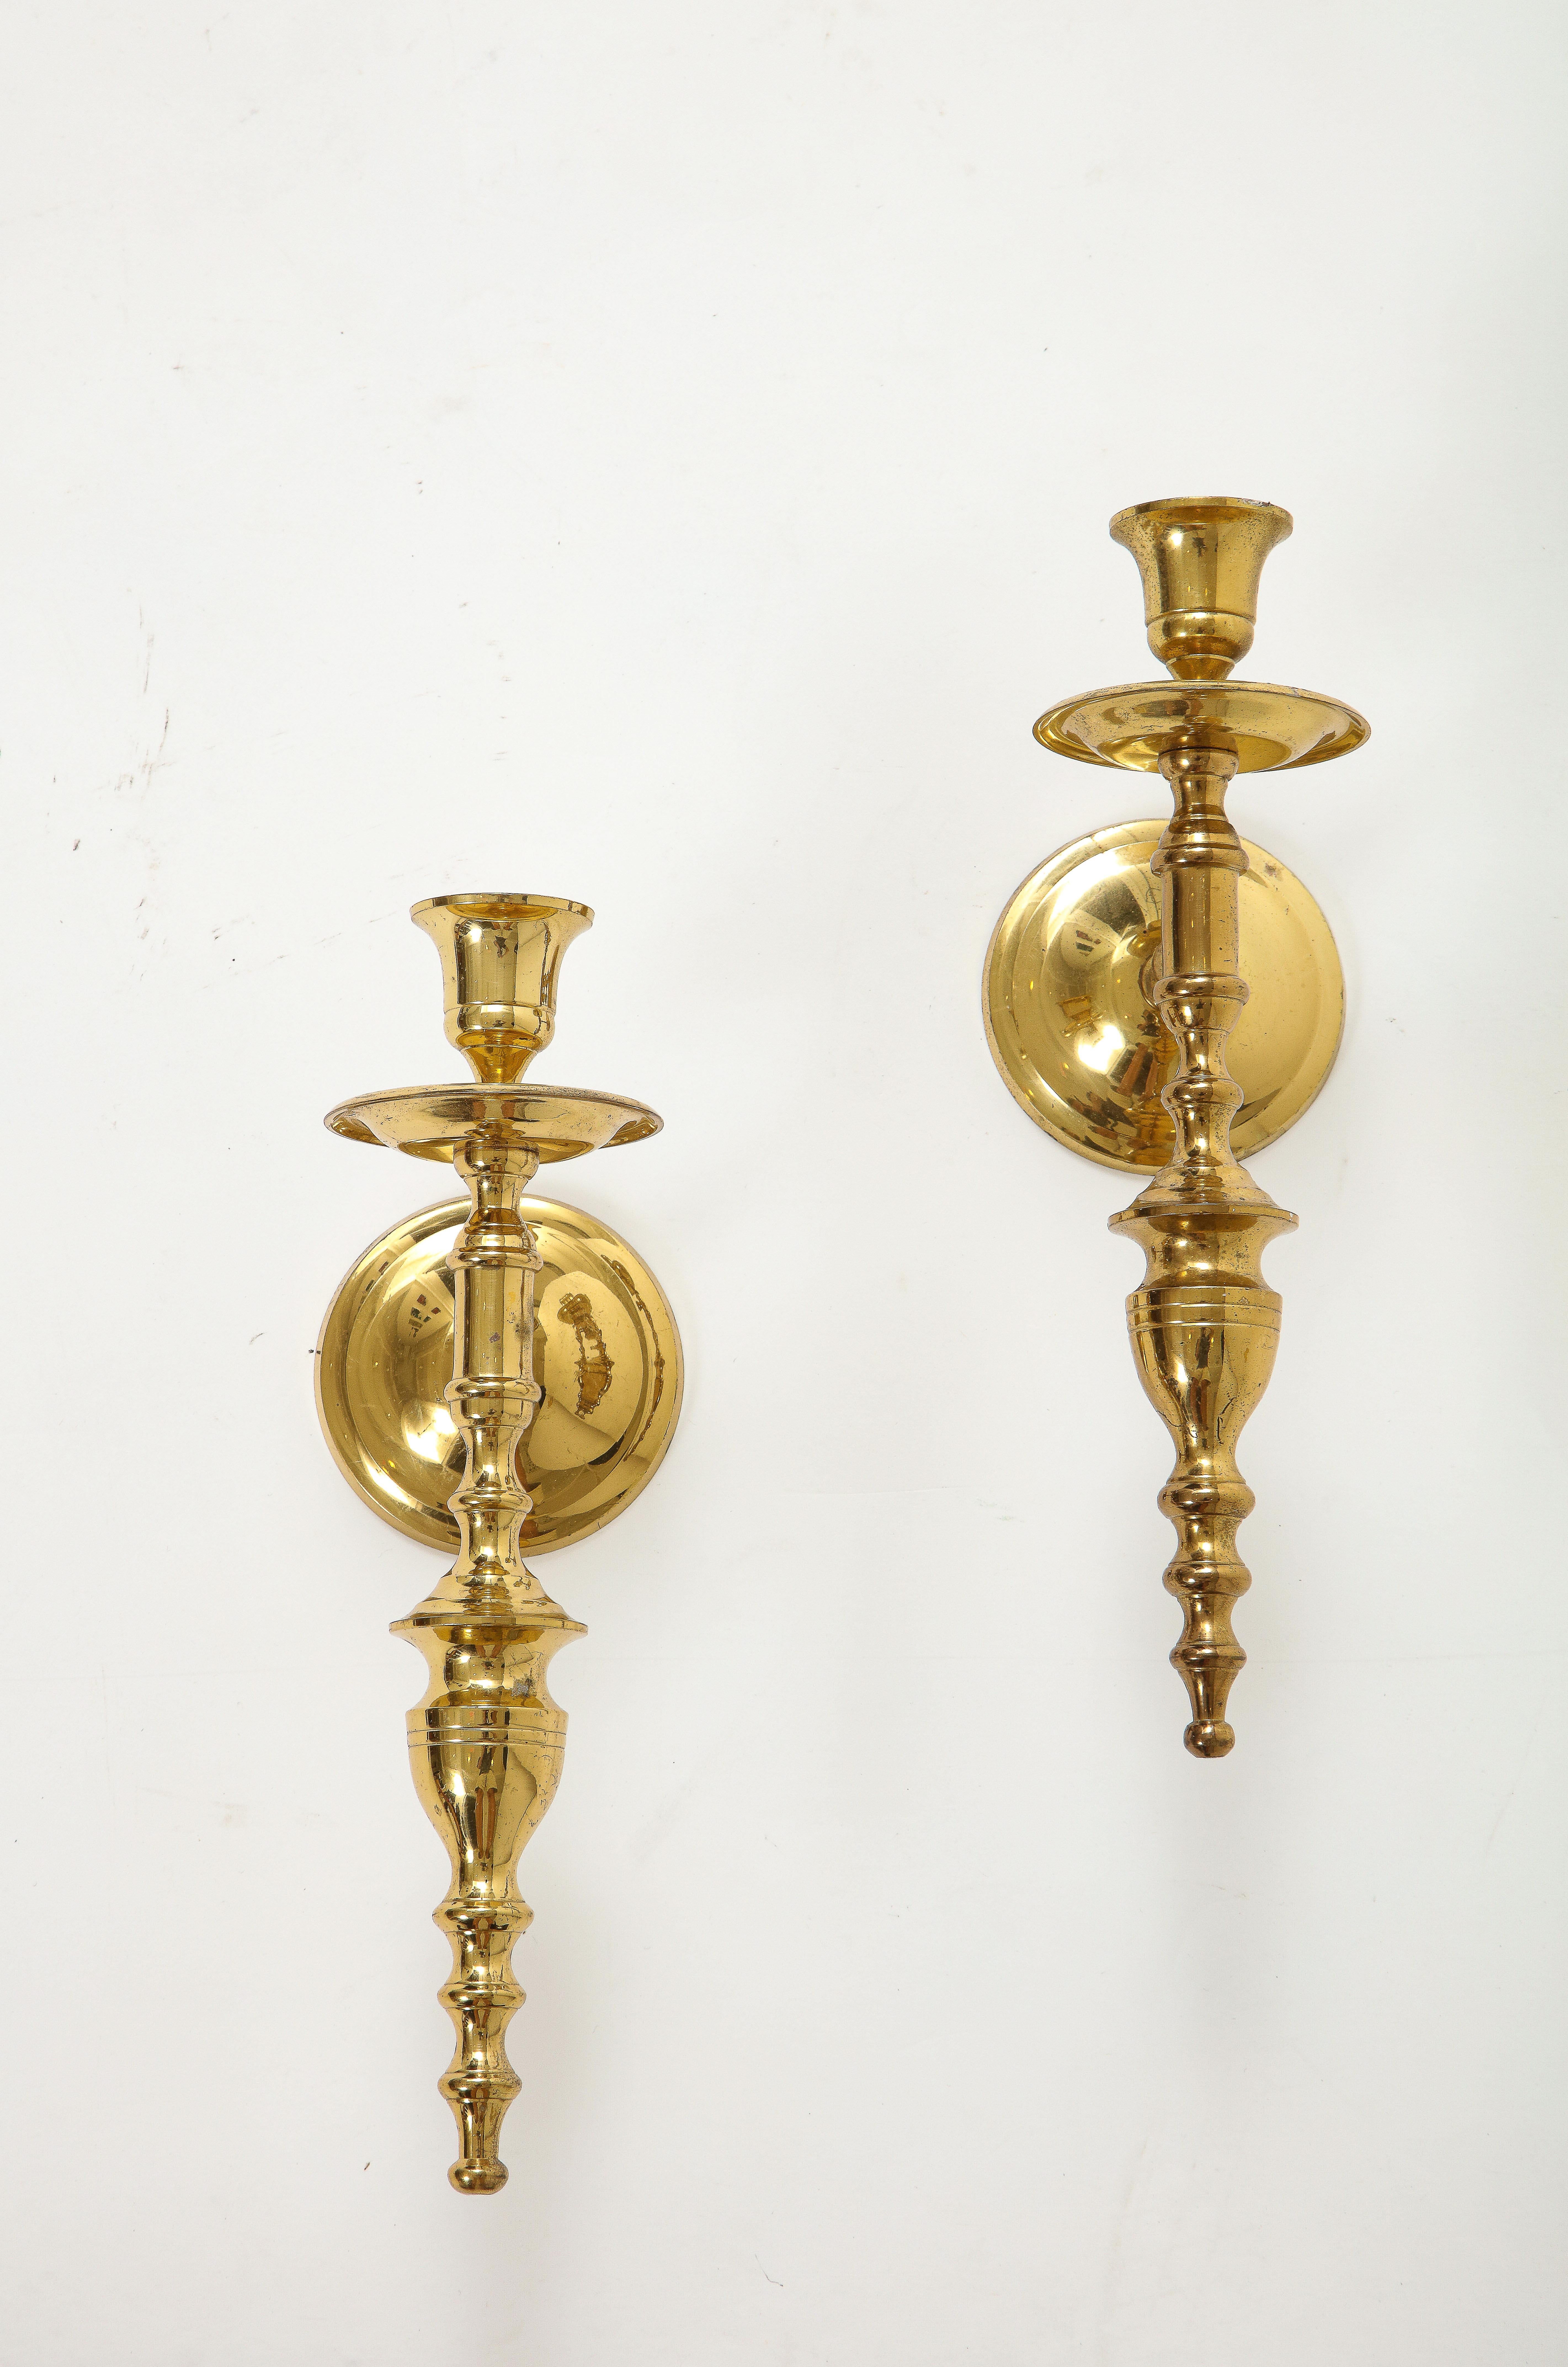 Pair of Hollywood Regenbcy sold brass sconces with a Tommi Parzinger influence. Brass backplate measures 3 3/8 inches in diameter.